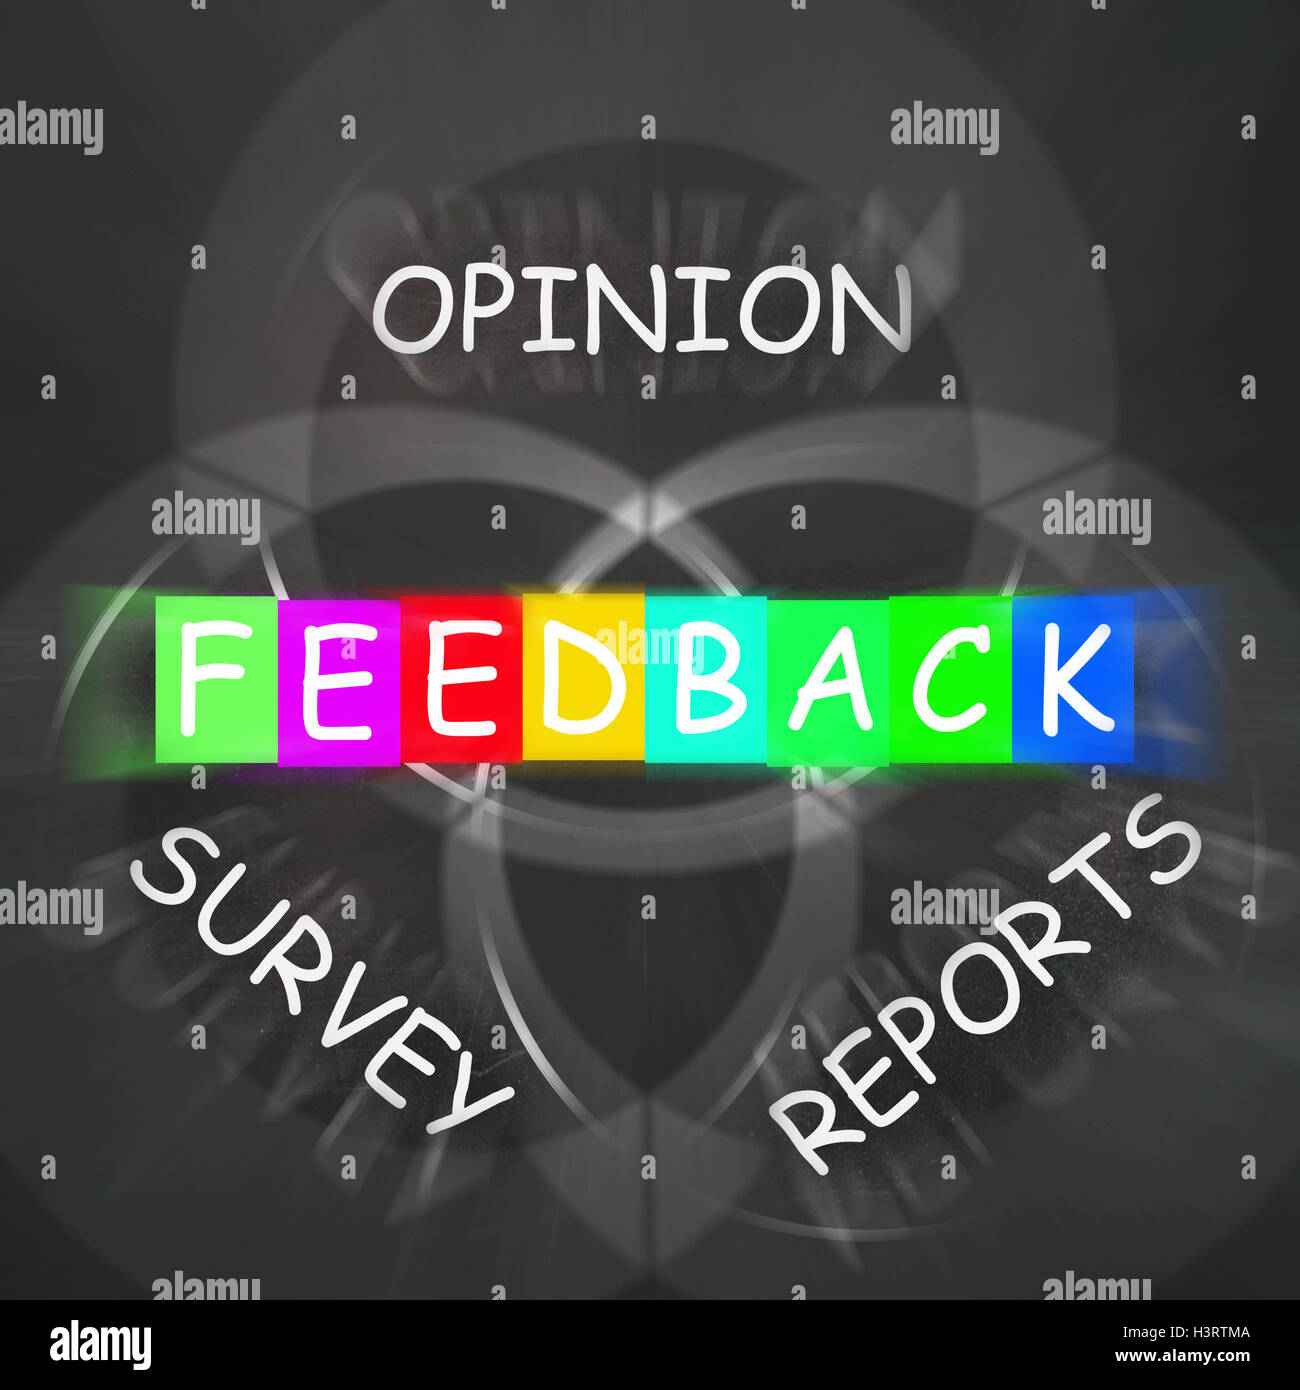 Feedback Displays Reports and Surveys of Opinions Stock Photo